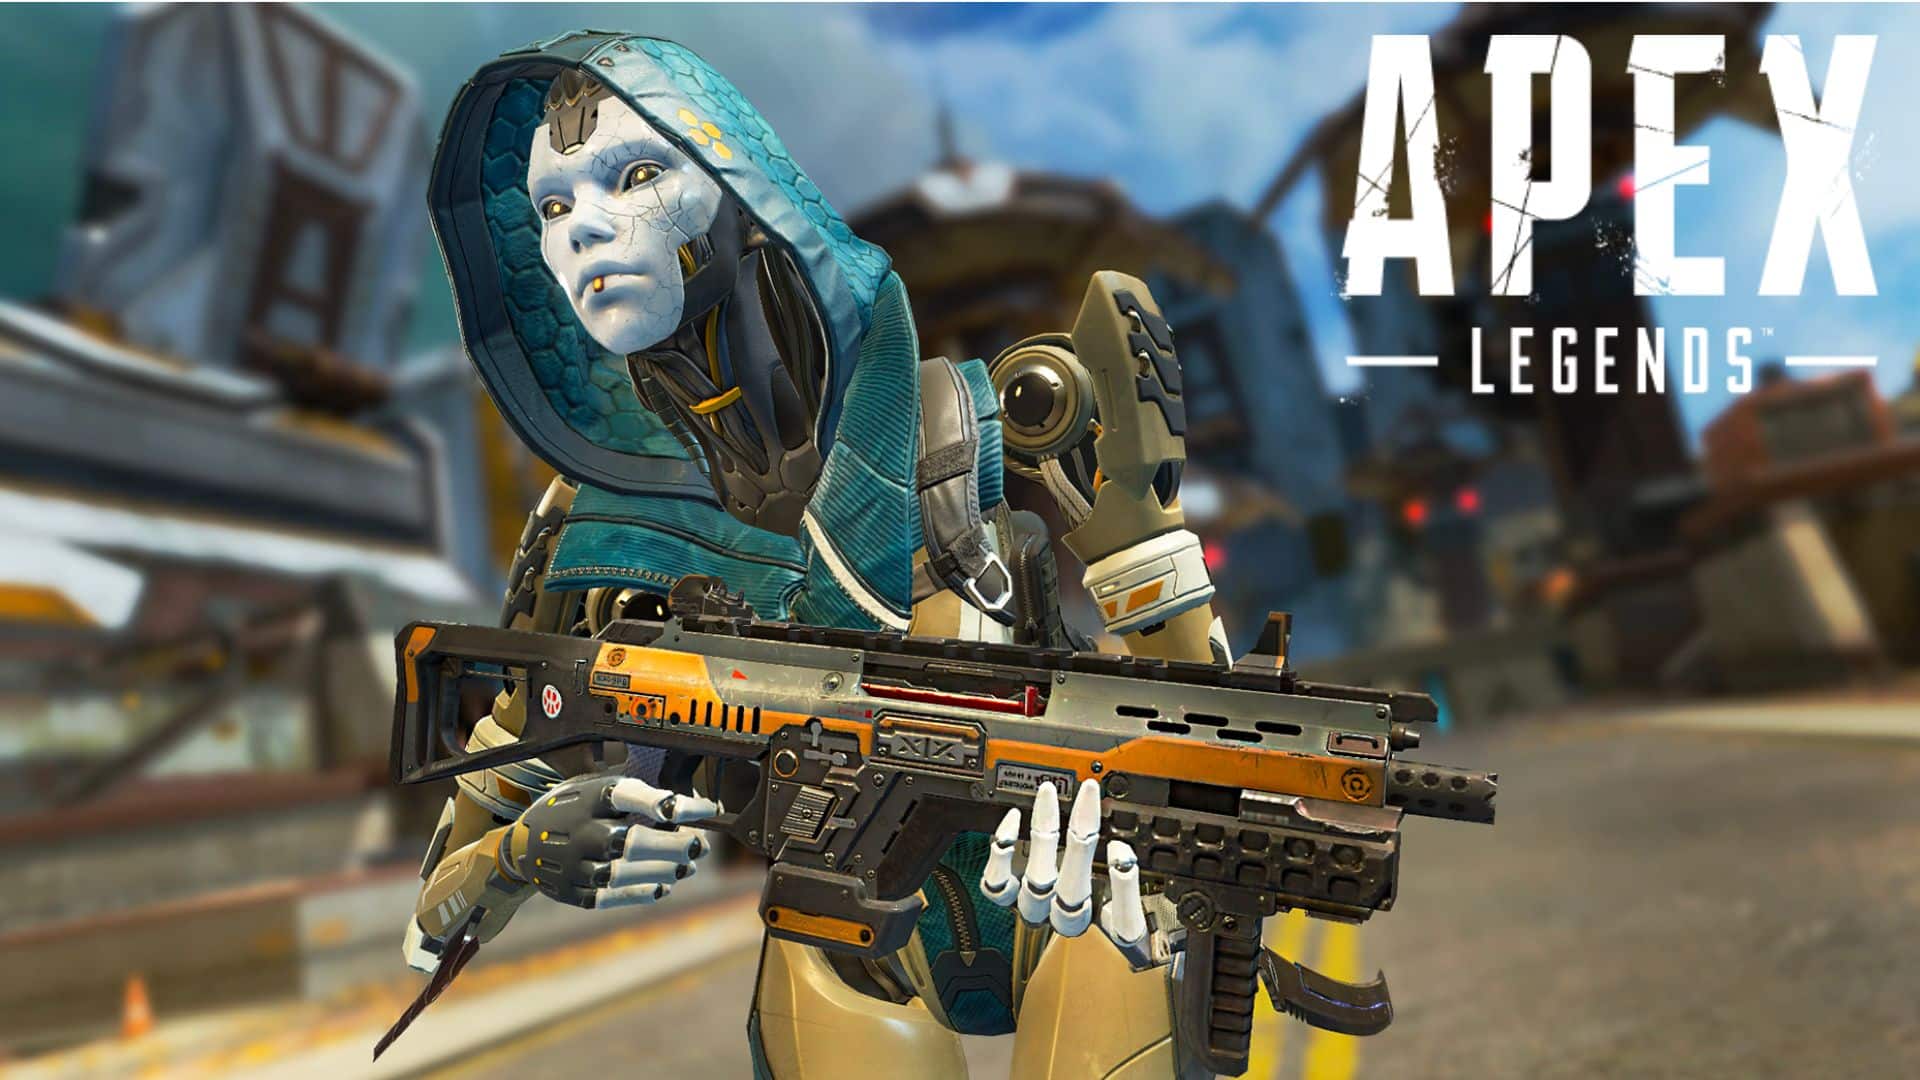 Ash running with CAR SMG in Apex Legends